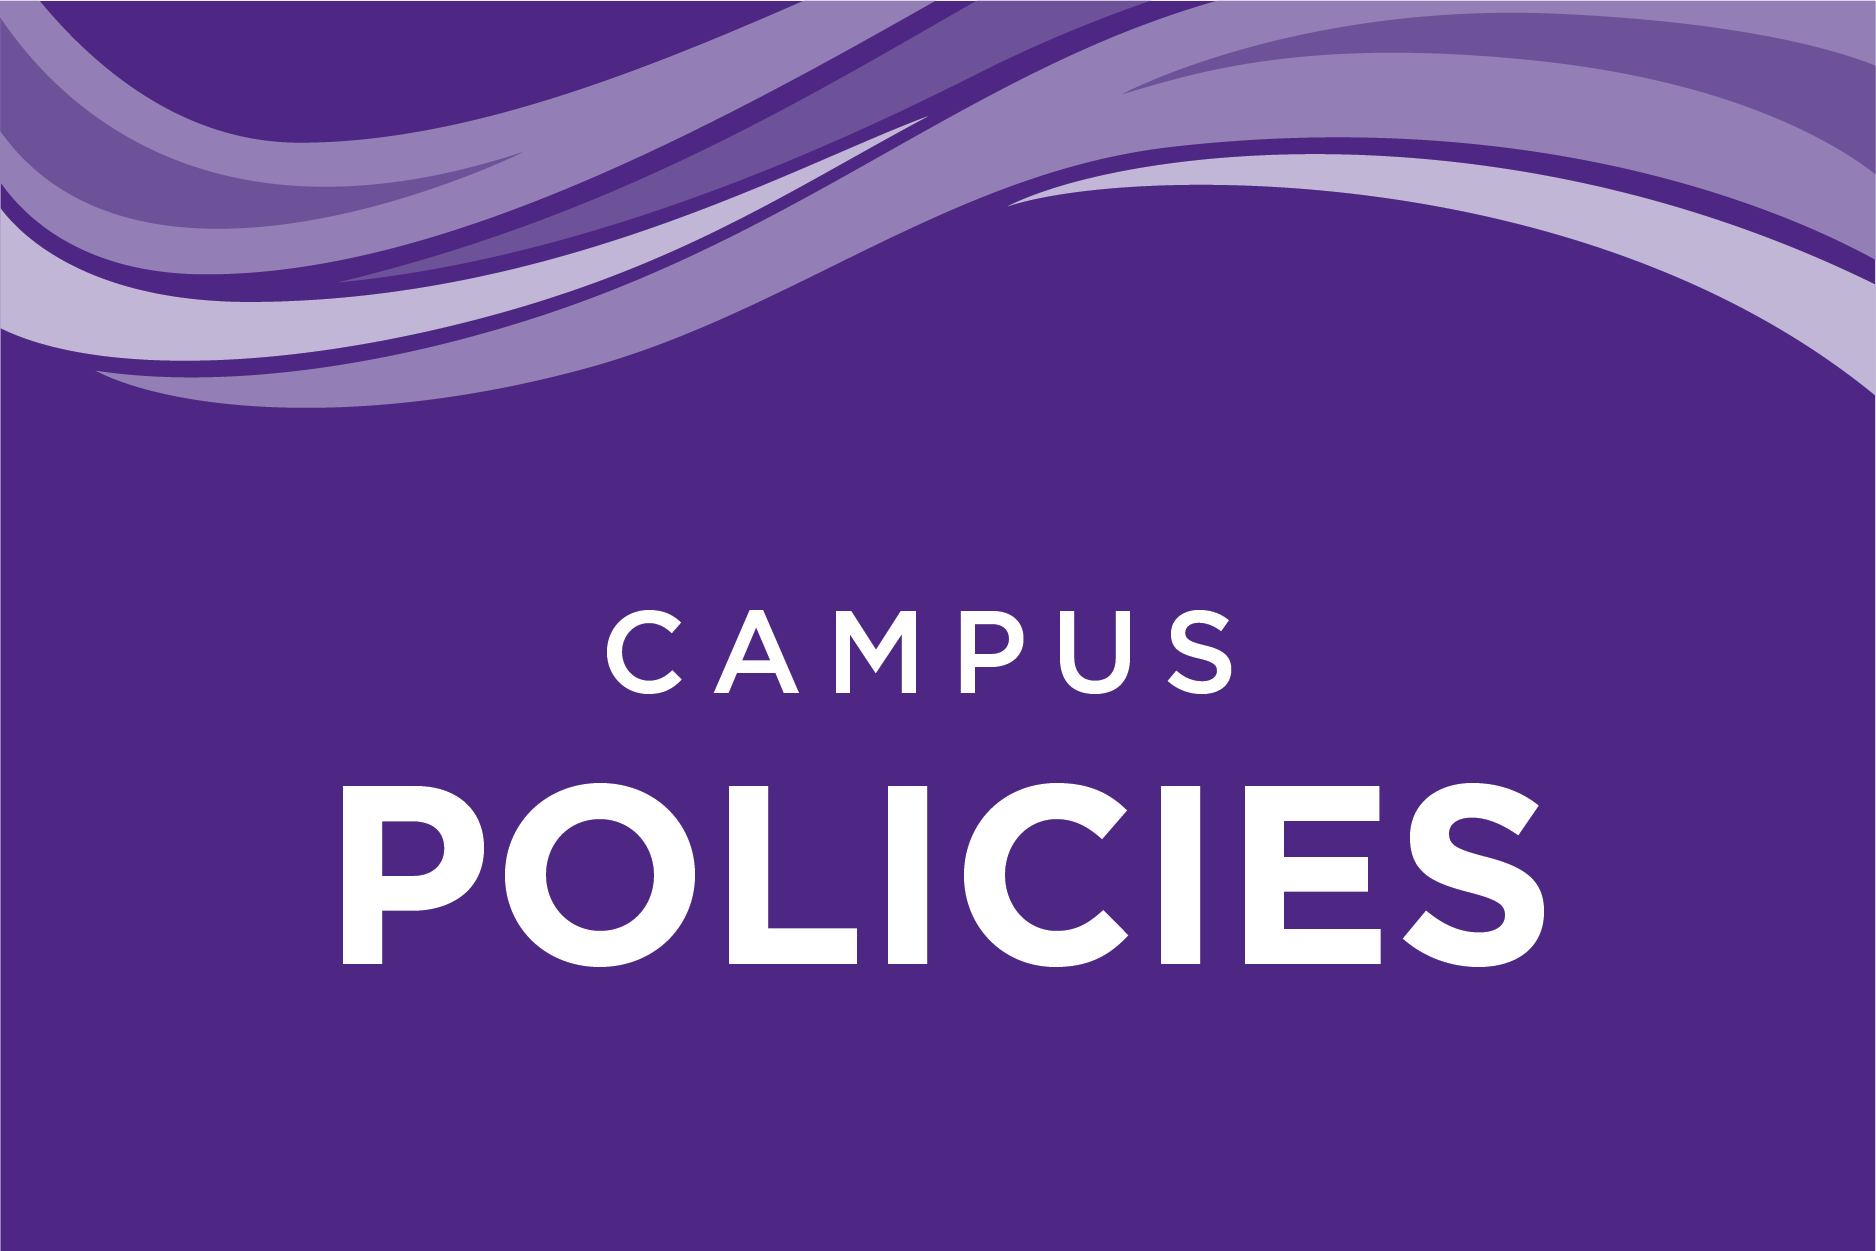 Campus policies for UW-Whitewater